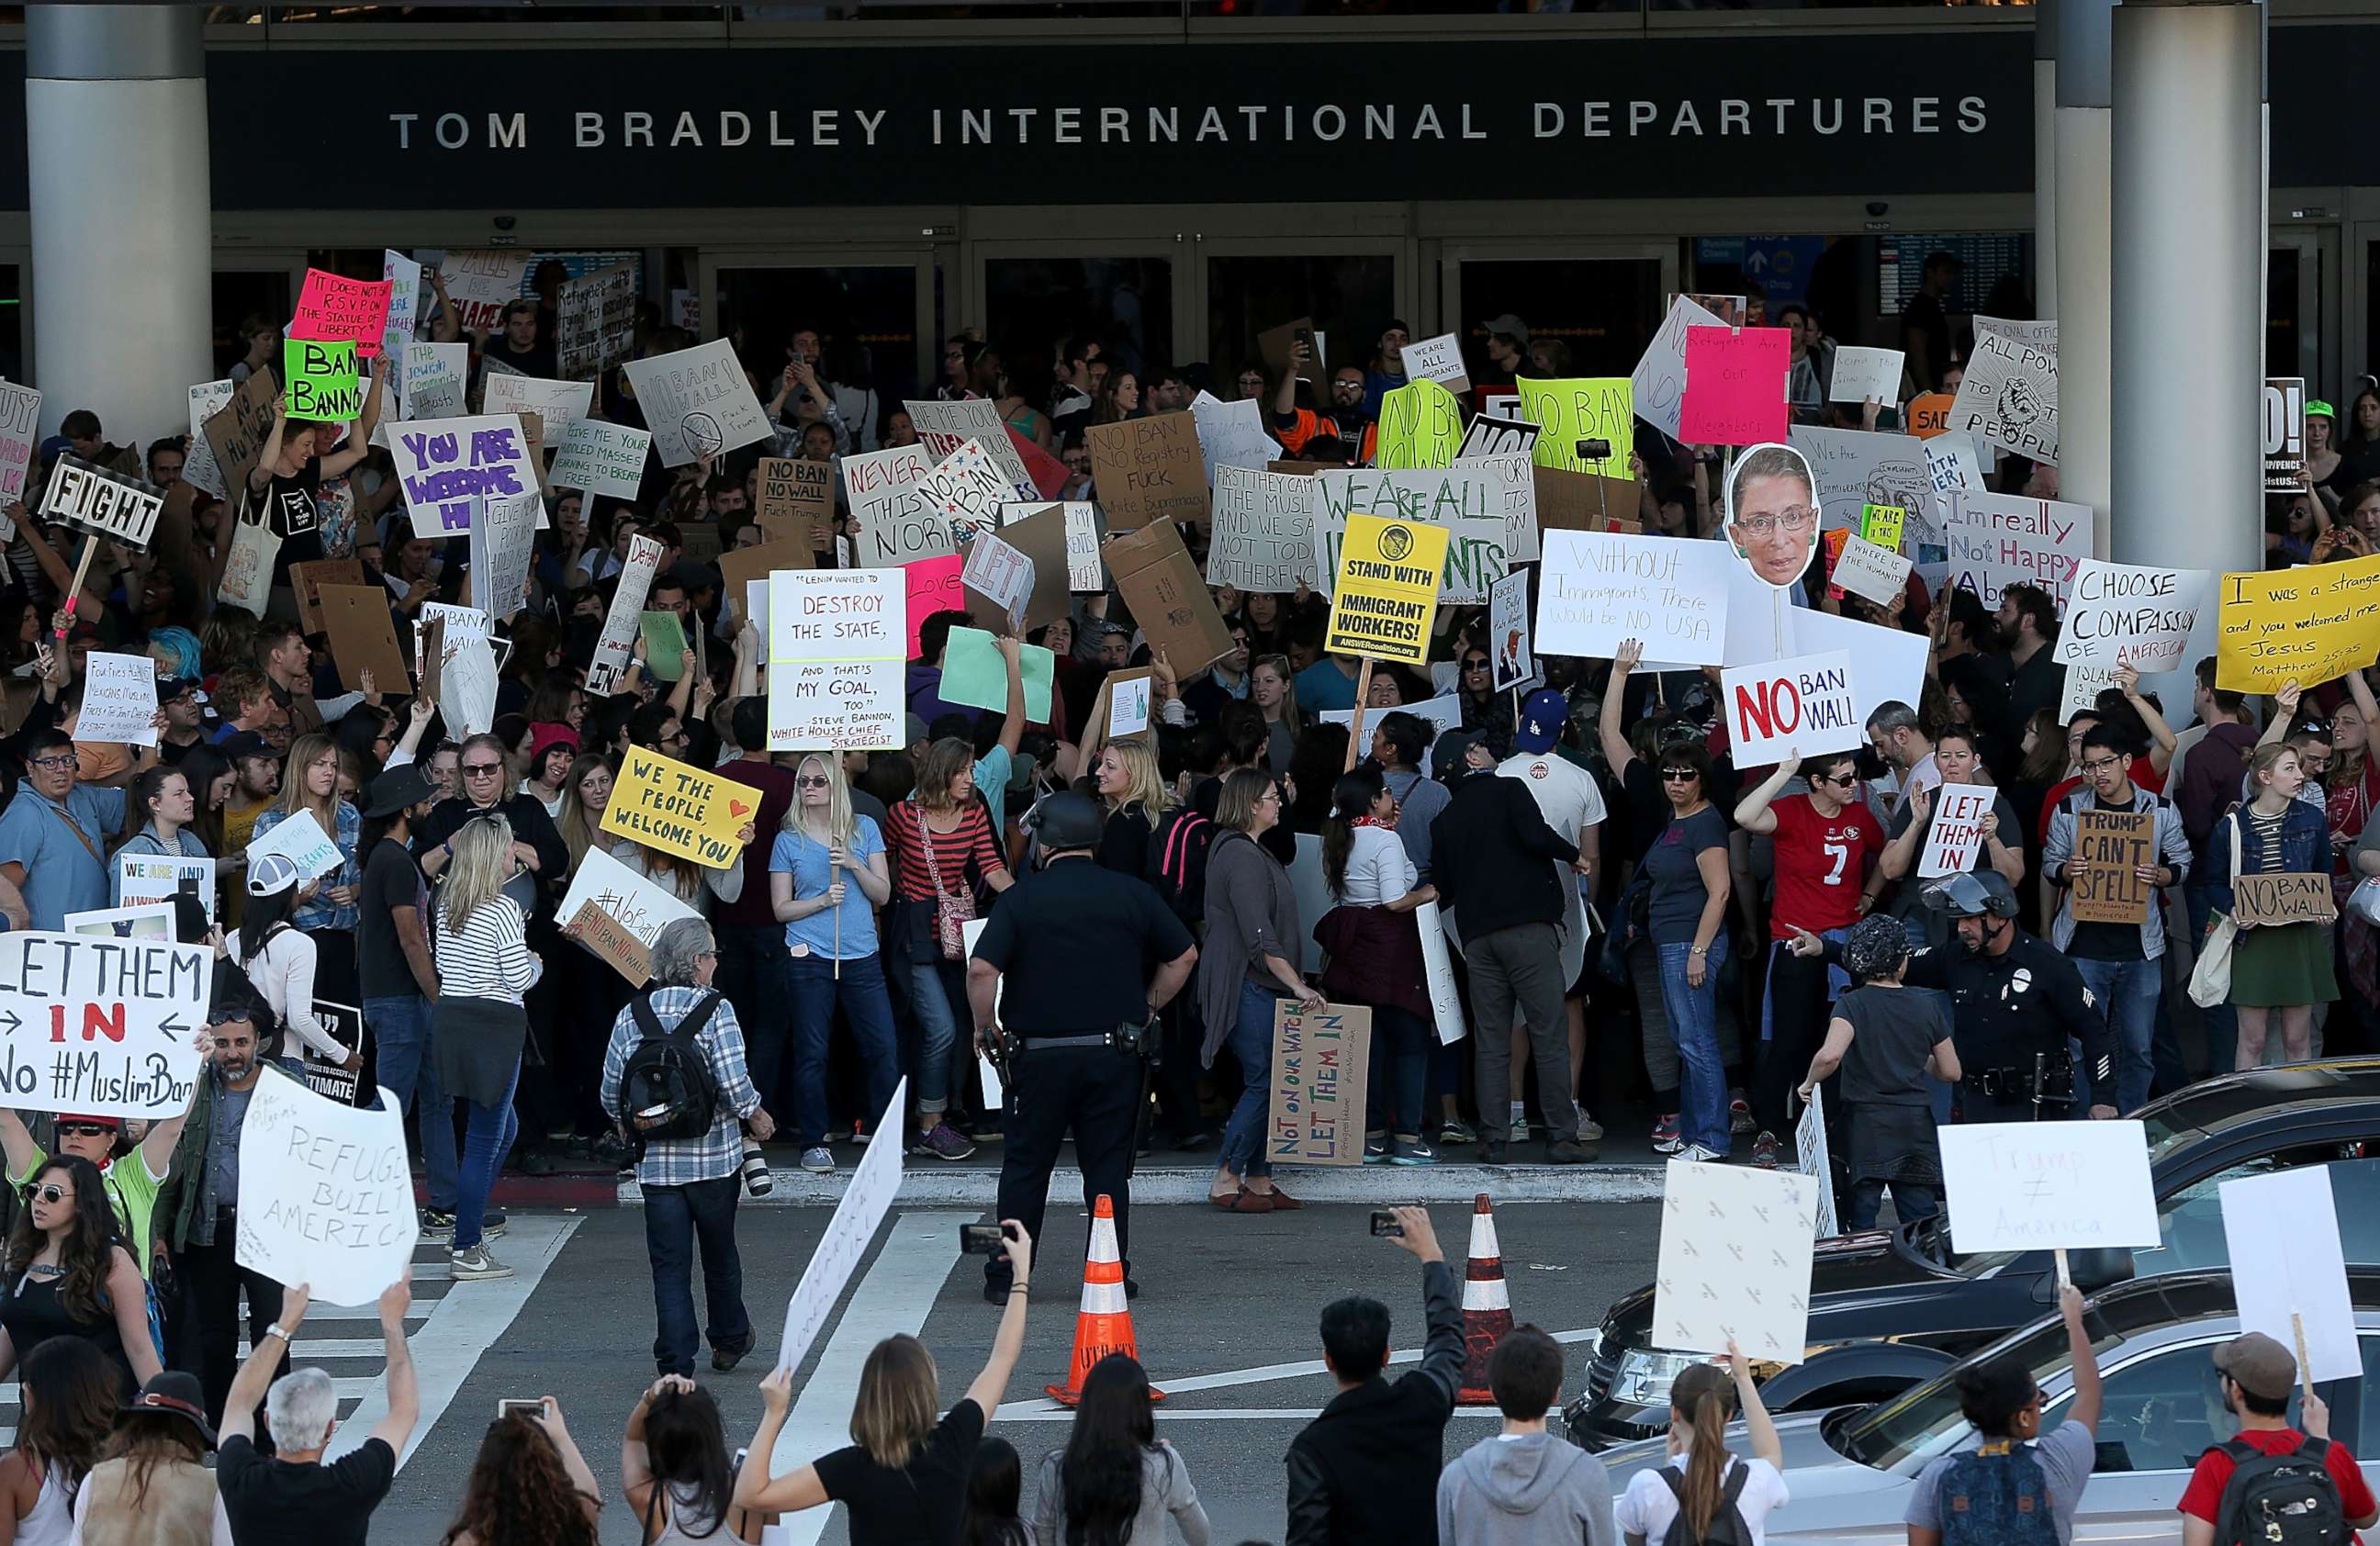 PHOTO: Protesters hold signs during a demonstration against the immigration ban at Los Angeles International Airport, Jan. 29, 2017.